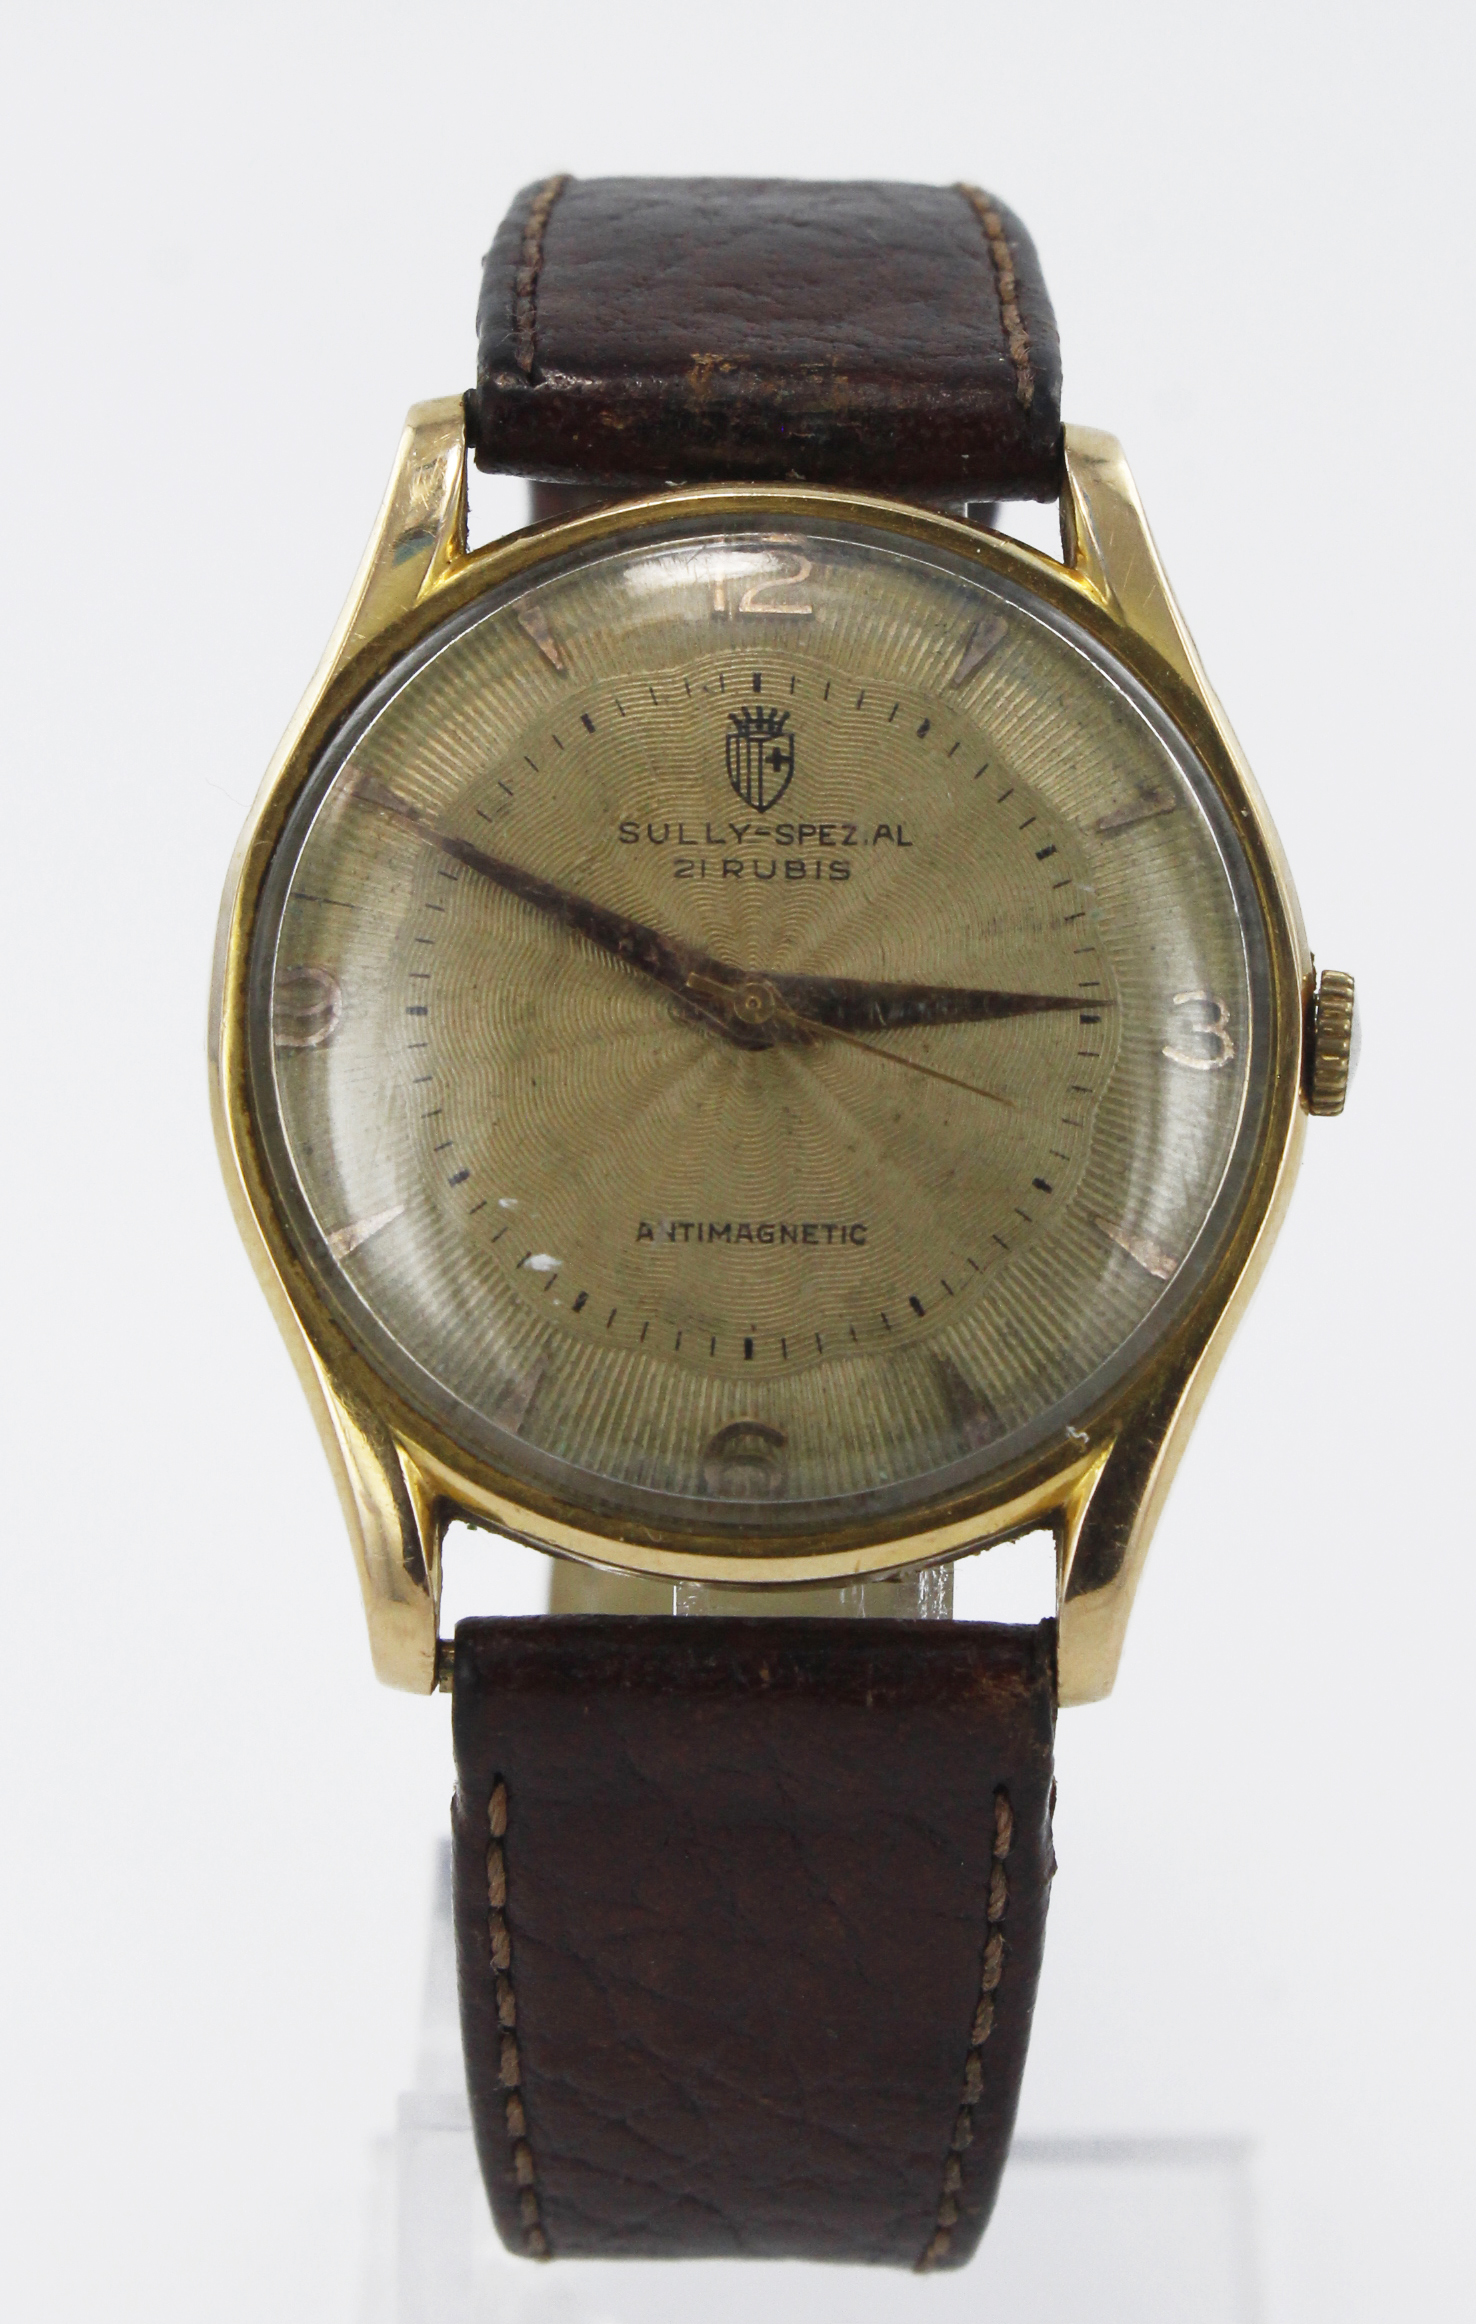 Gents 18ct cased 'Sully-Spezial' manual wind wristwatch. The guilloché dial with gilt Arabic